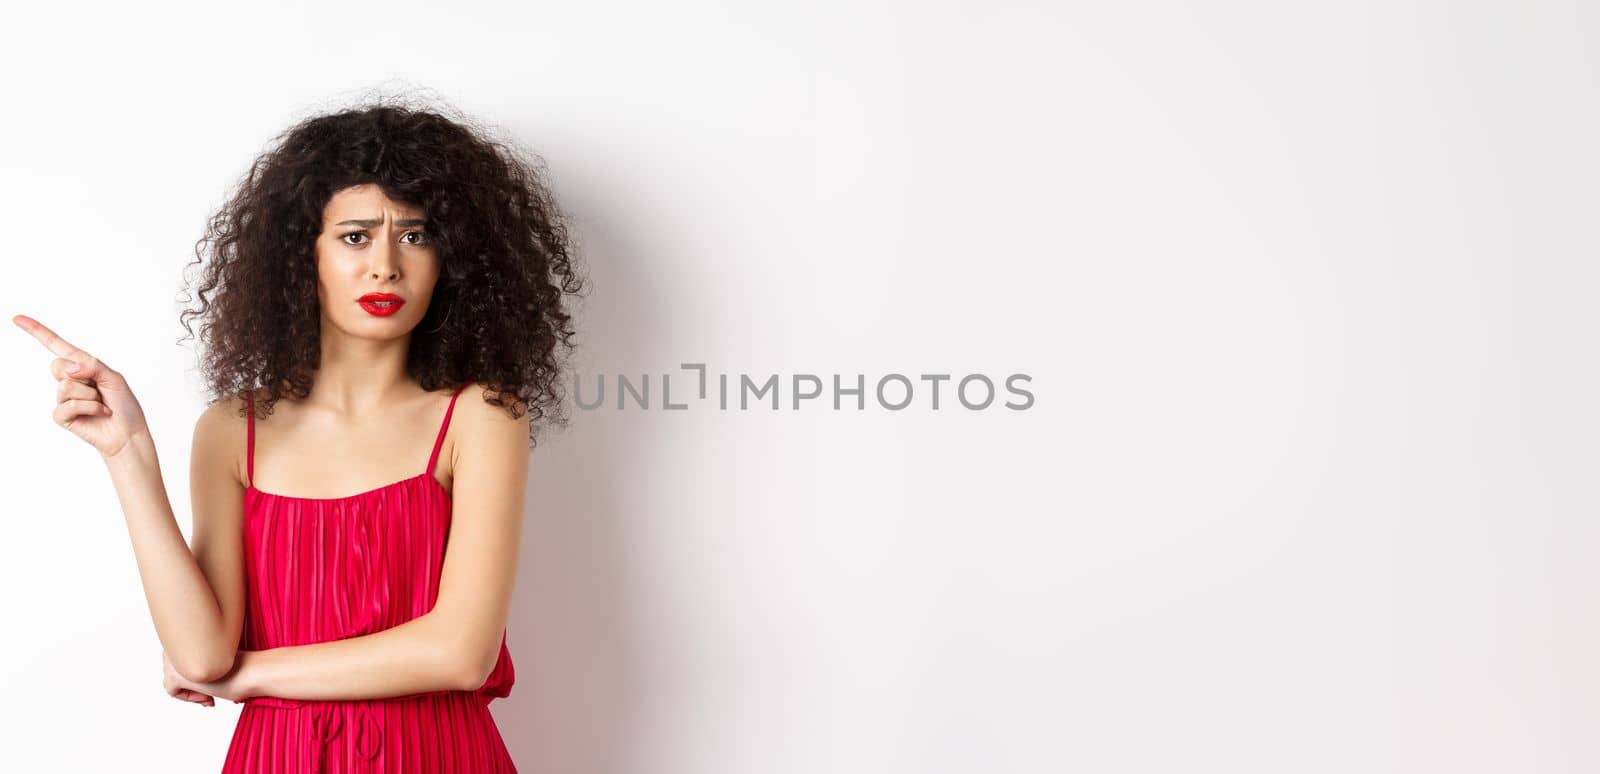 Arrogant young woman with curly hair, wearing red dress, frowning and complaining, pointing finger left at promo, standing over white background.